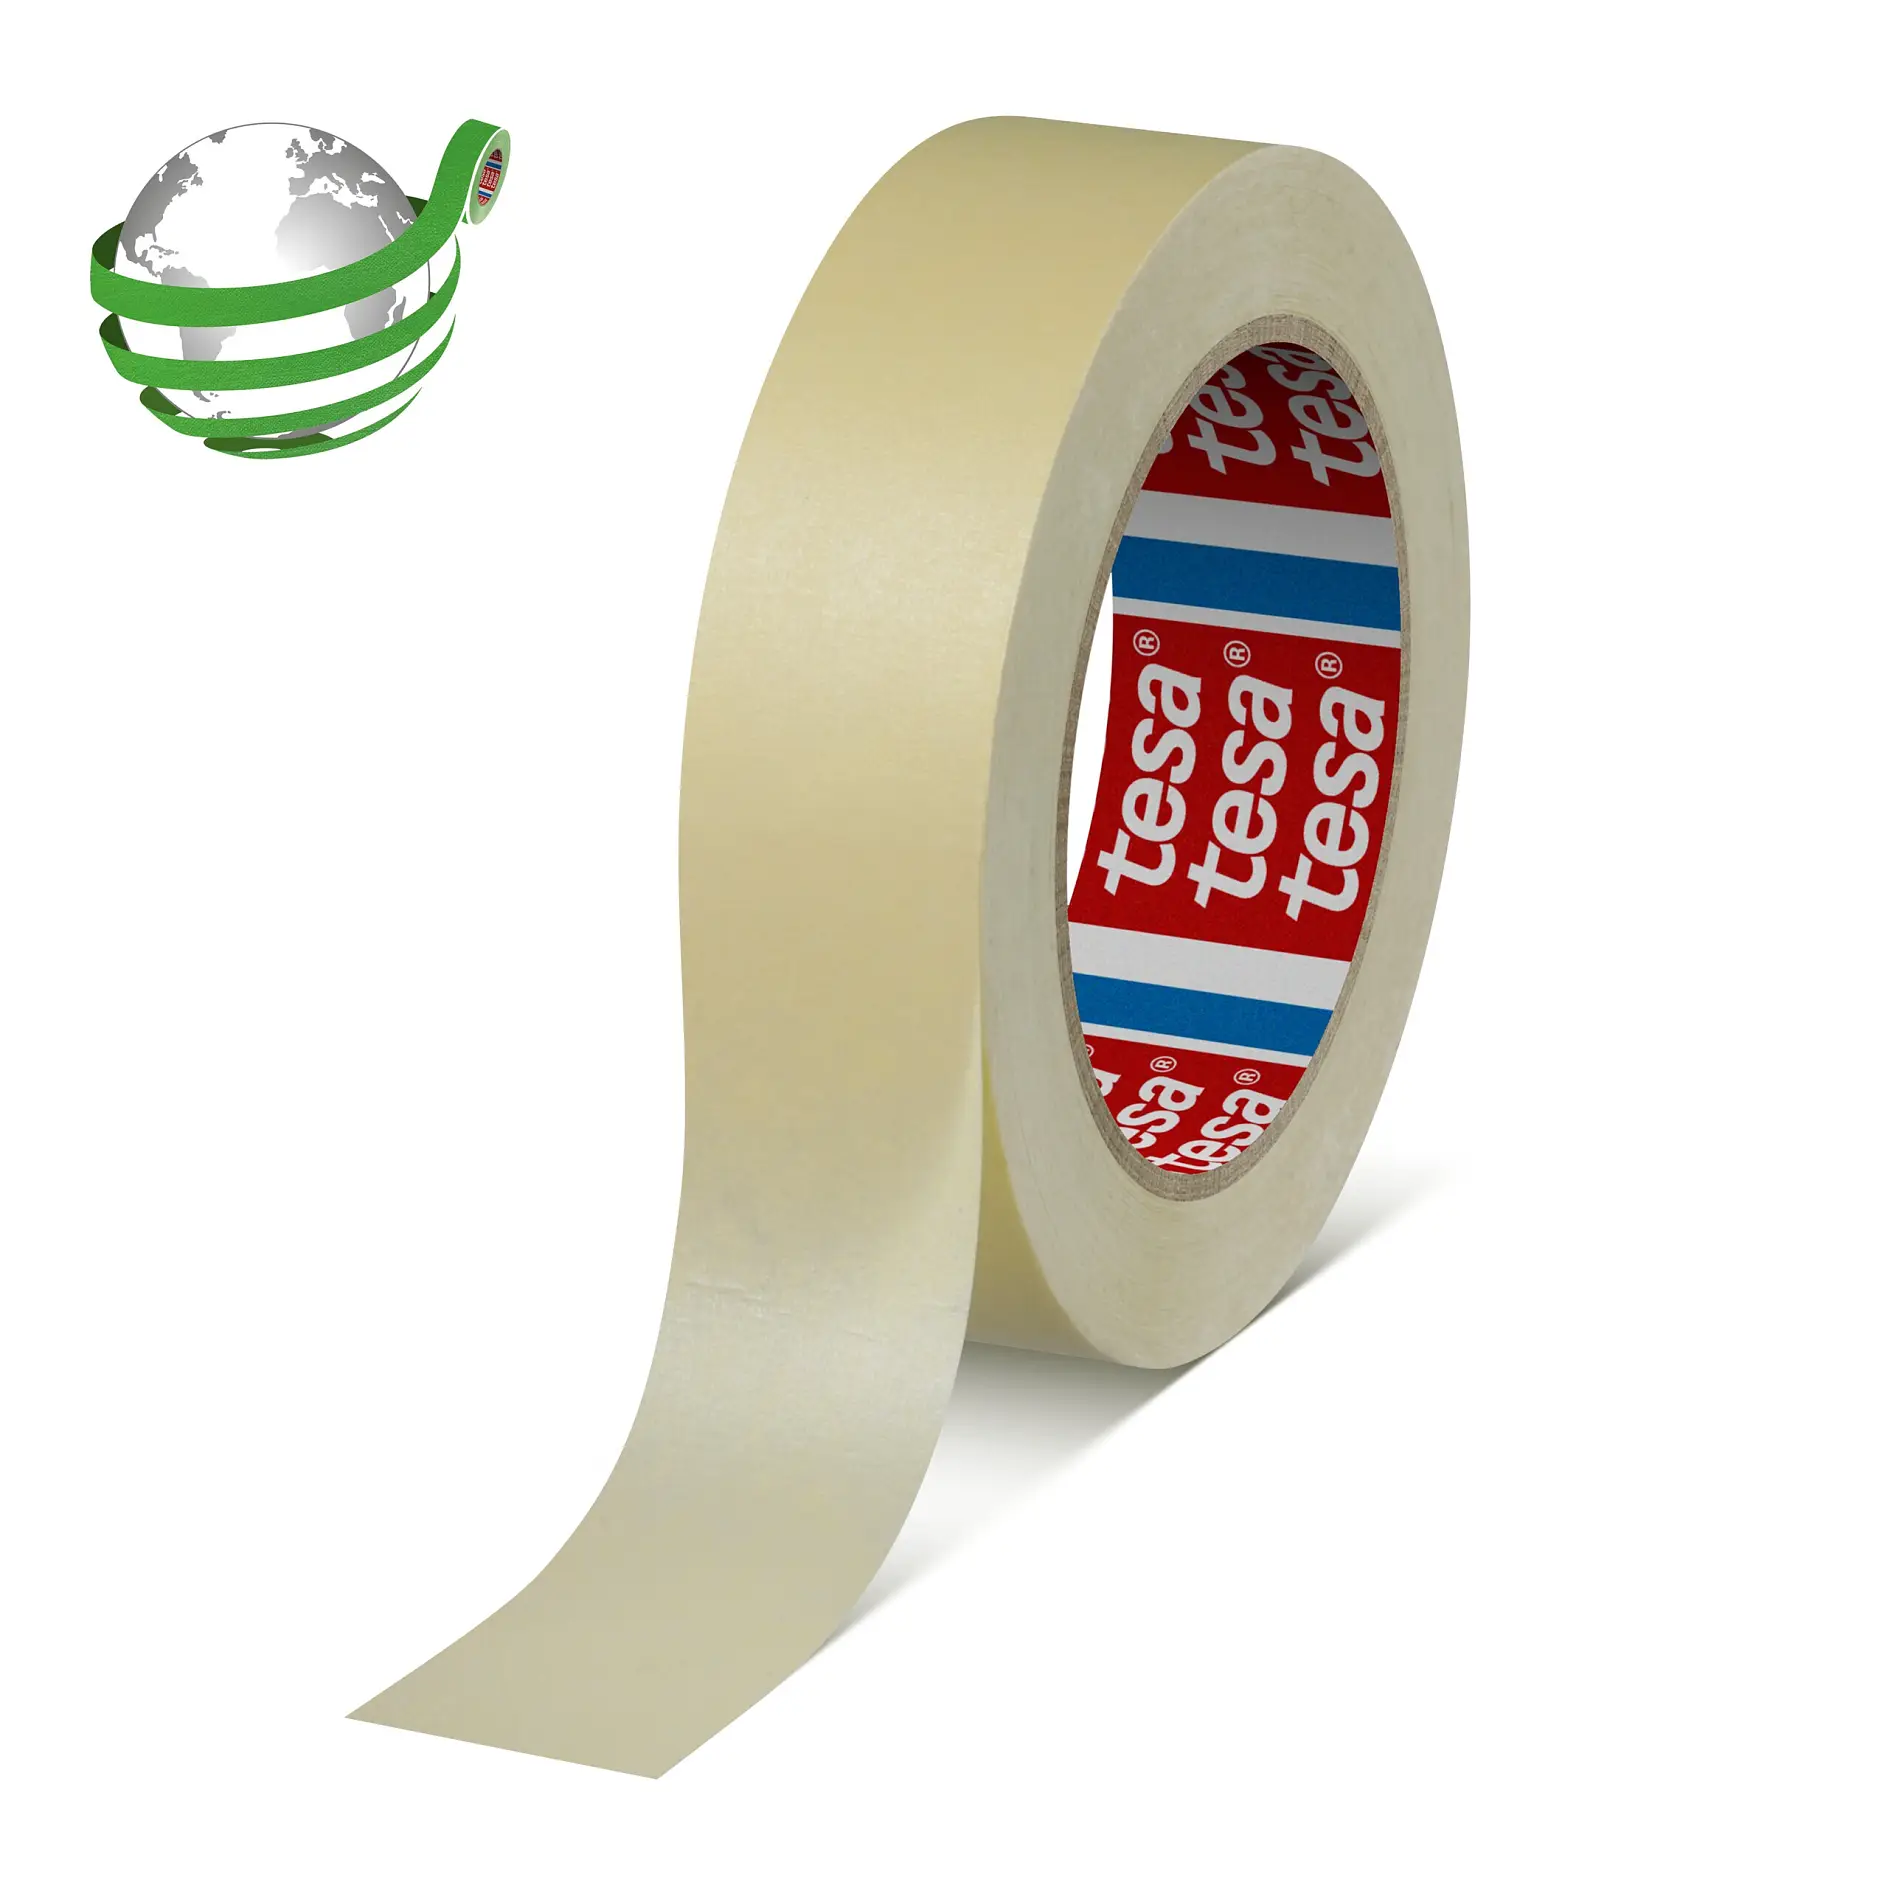 tesa-4329-pv1-finely-creped-paper-mask-tape-chamois-043290000301-pr-with-marker